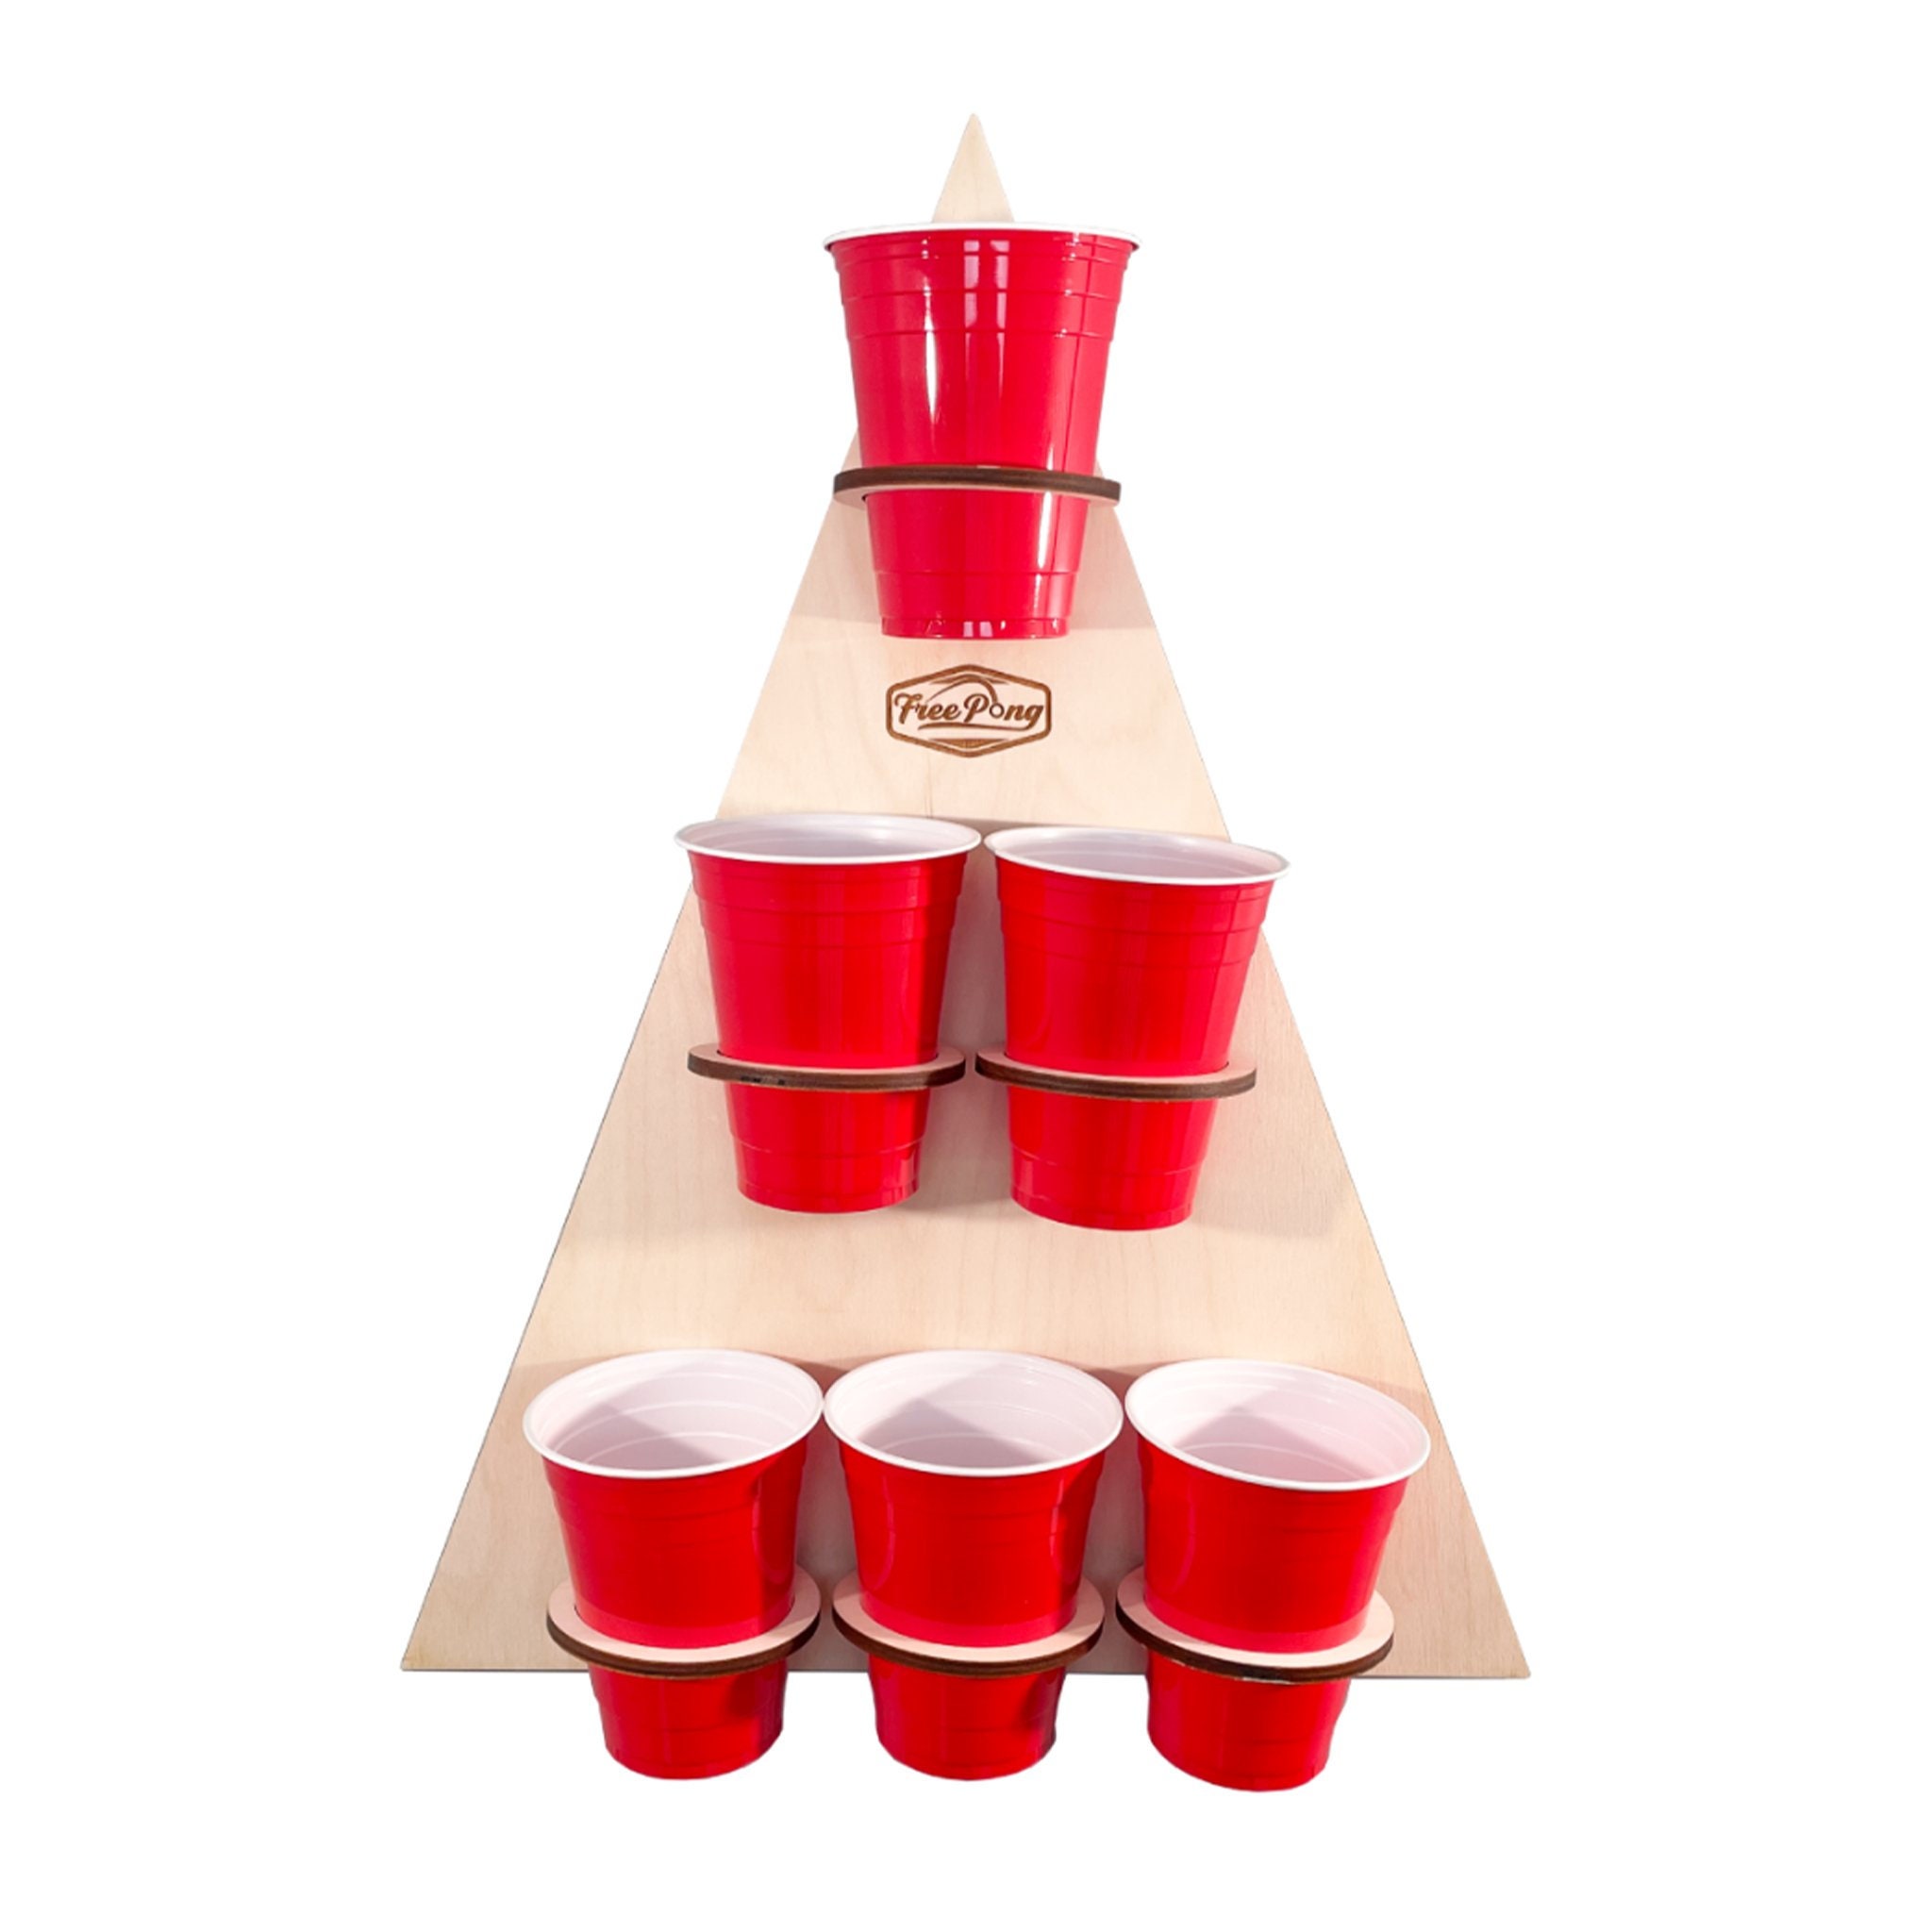 Red Plastic Cup Stud Earrings Post Beer Jewelry Beer Accessories Beer Pong  Drinking Game Party Keg Alcohol BYOB College Funny Beer Gift Idea 